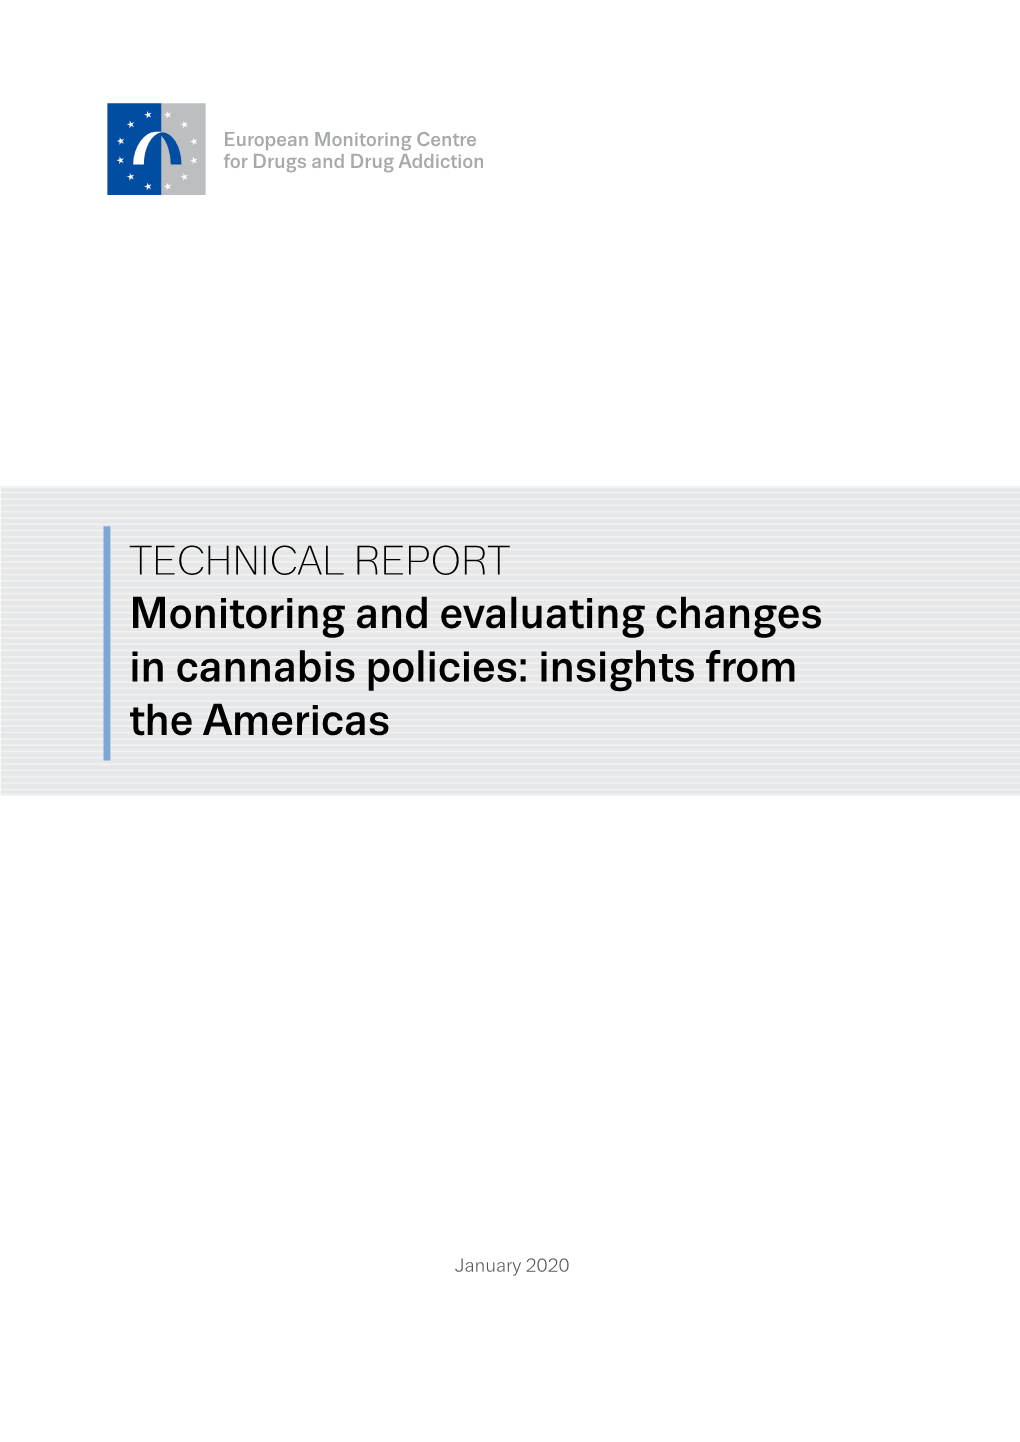 Monitoring and Evaluating Changes in Cannabis Polices: Insights from The